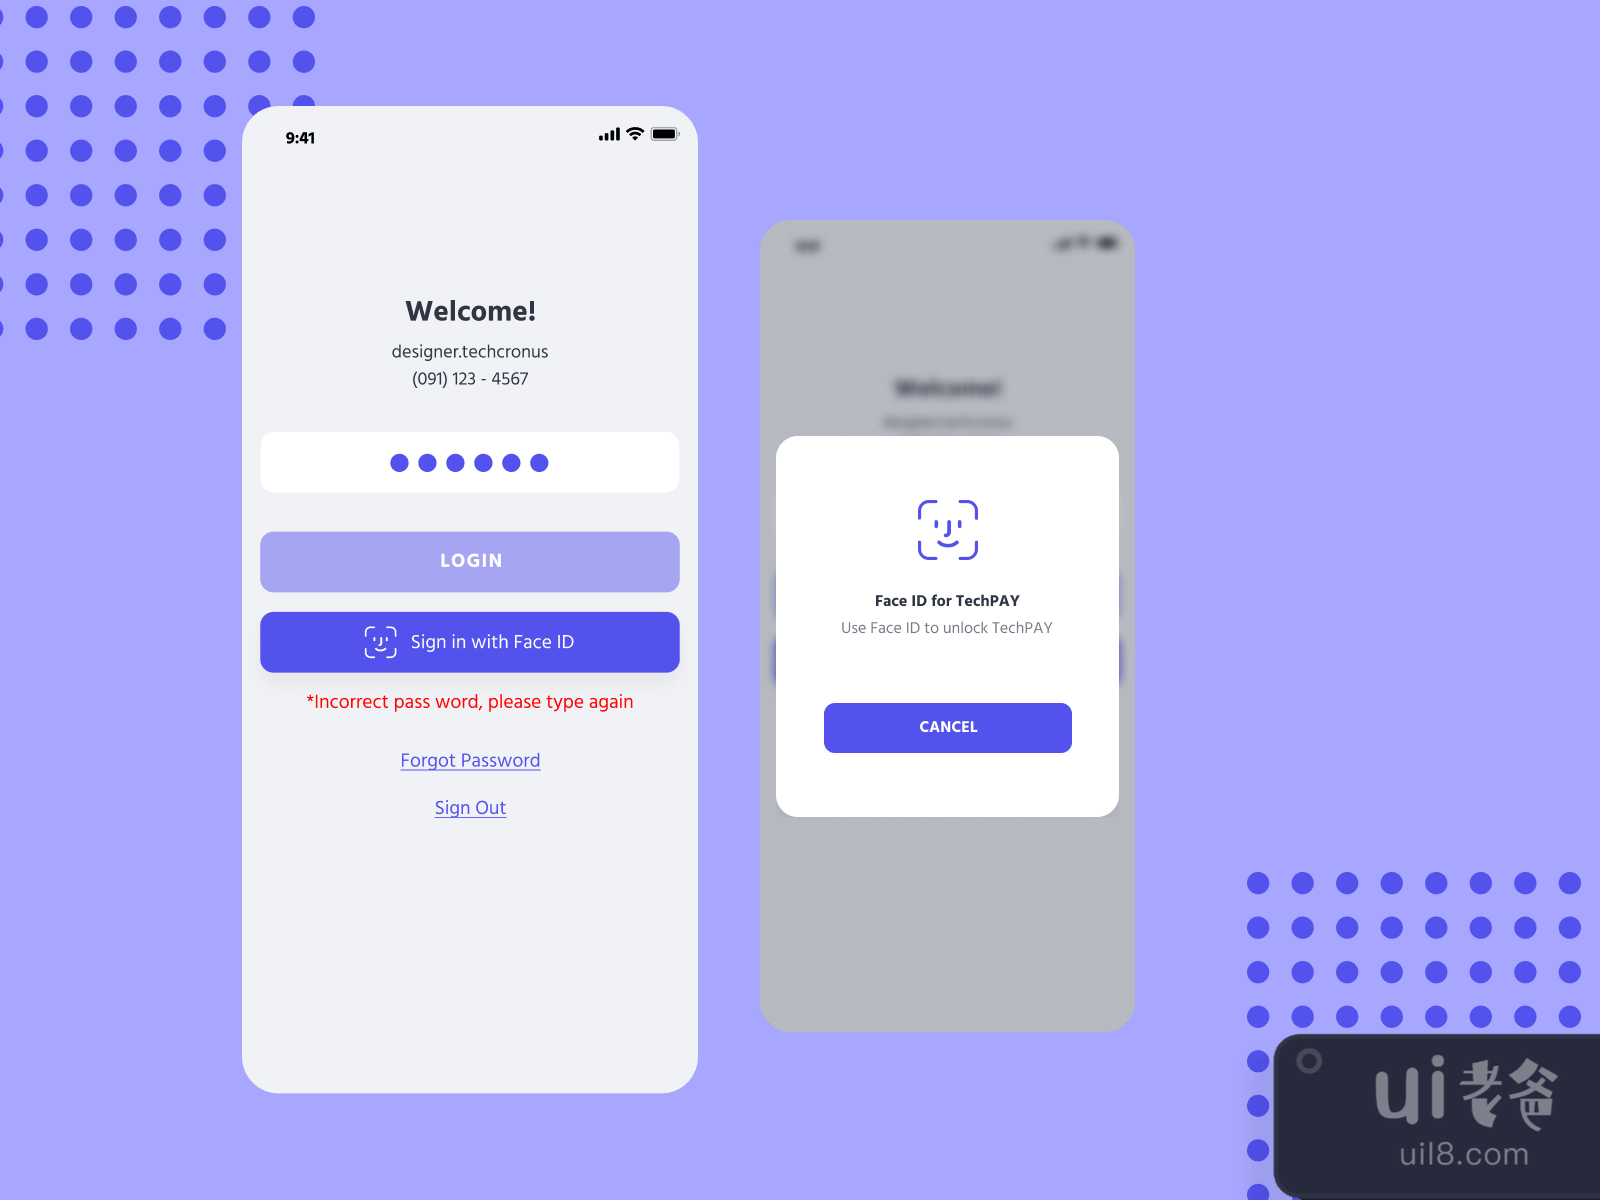 Wallet UI Kit for Figma and Adobe XD No 3